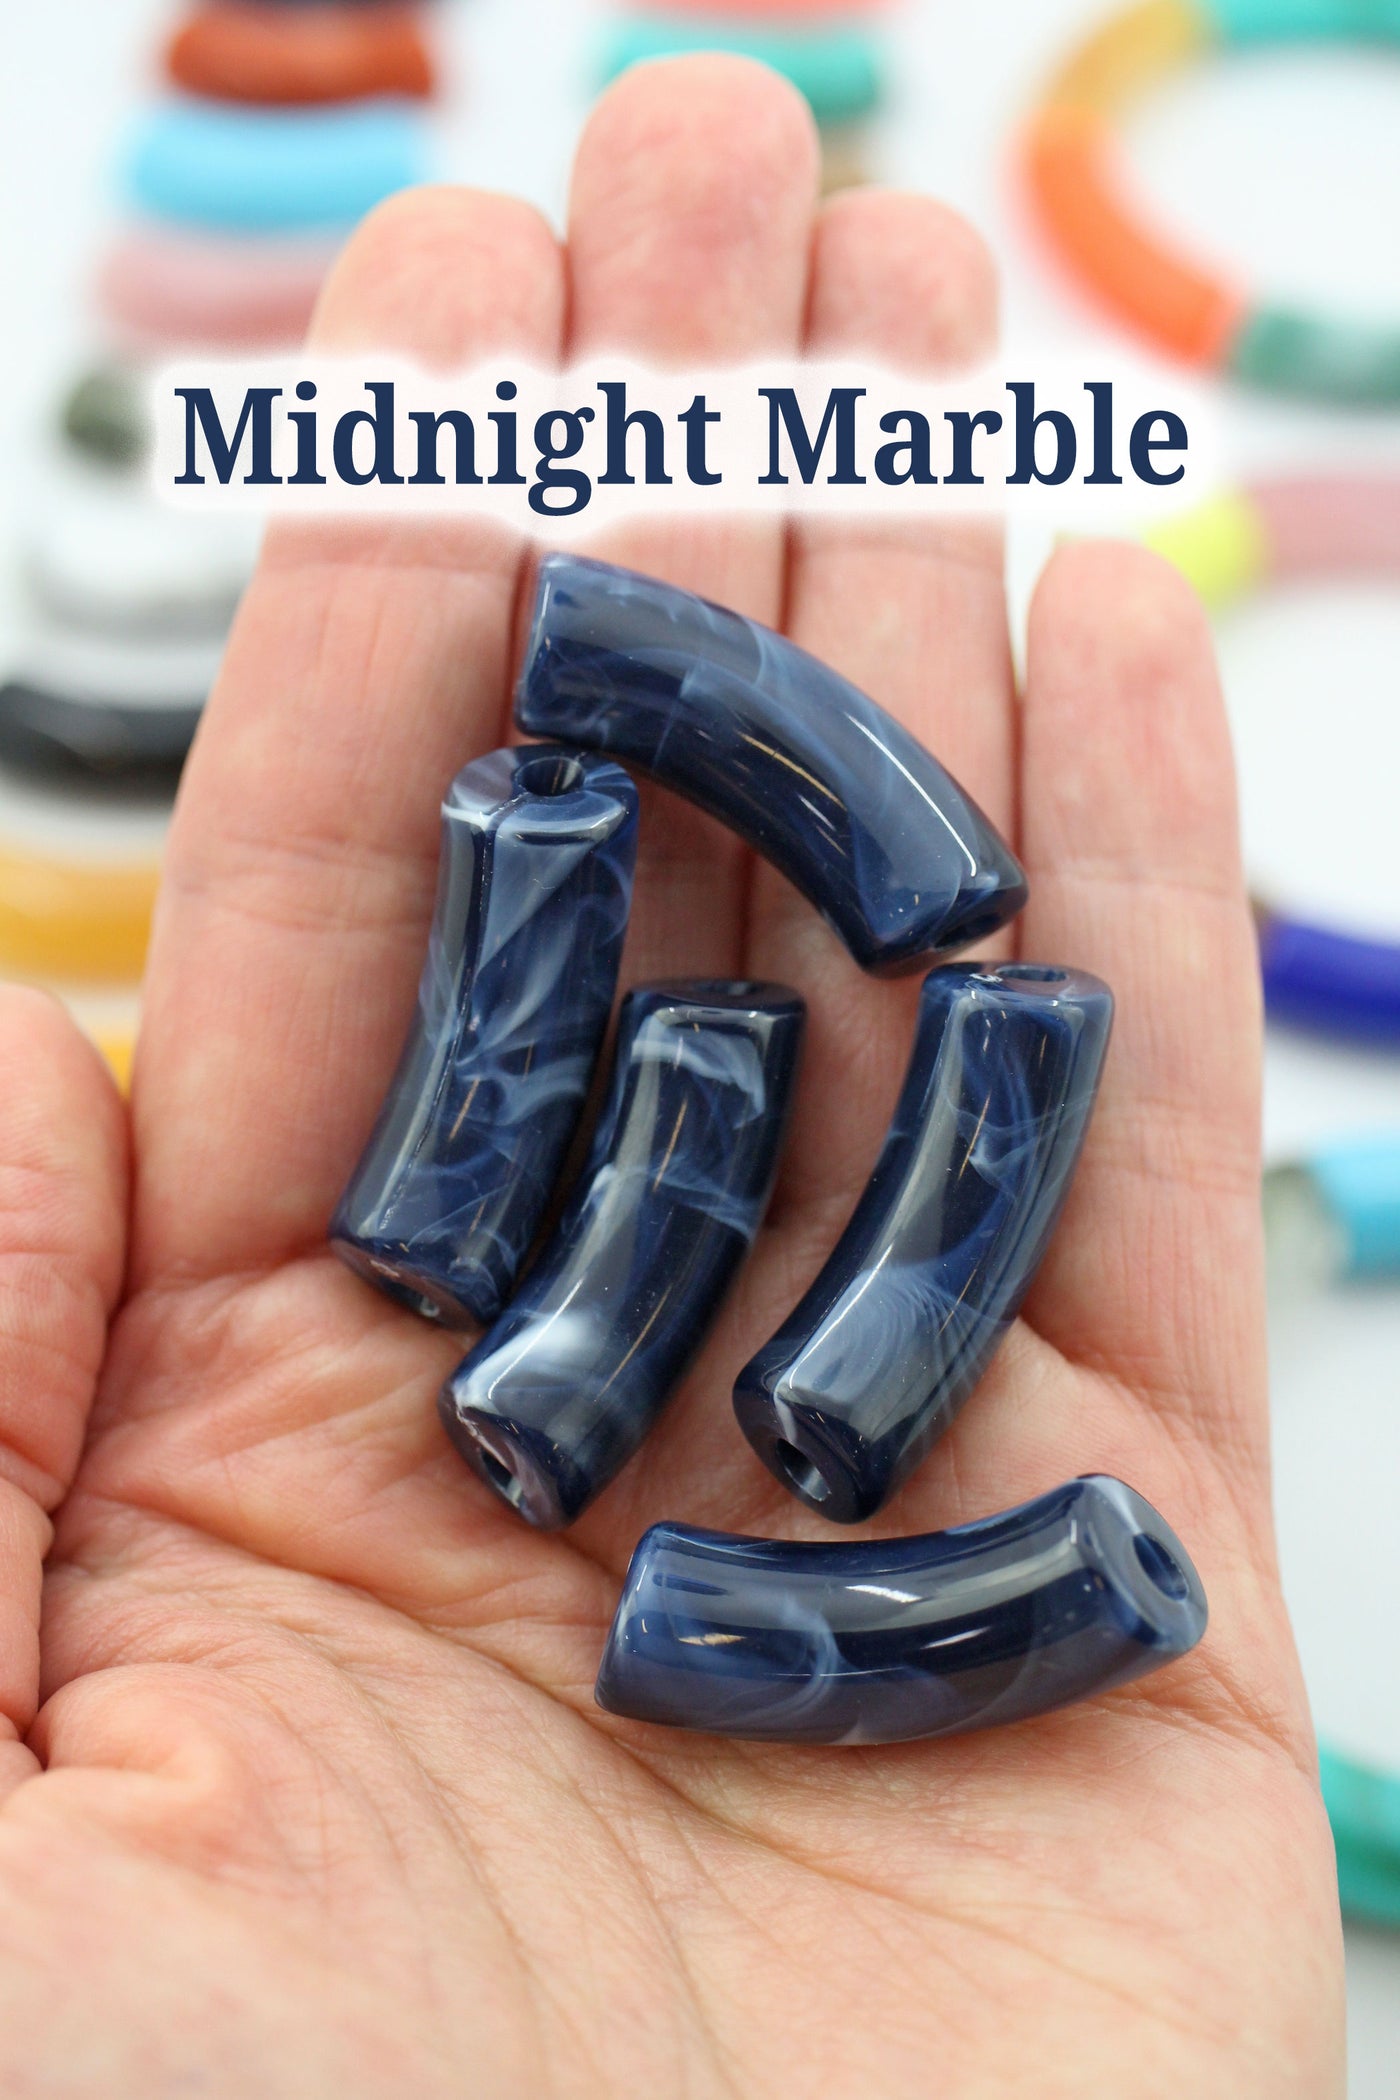 Midnight Marble Acrylic Bamboo Beads, Curved Tube Beads, 12mm Colorful Bangle Beads